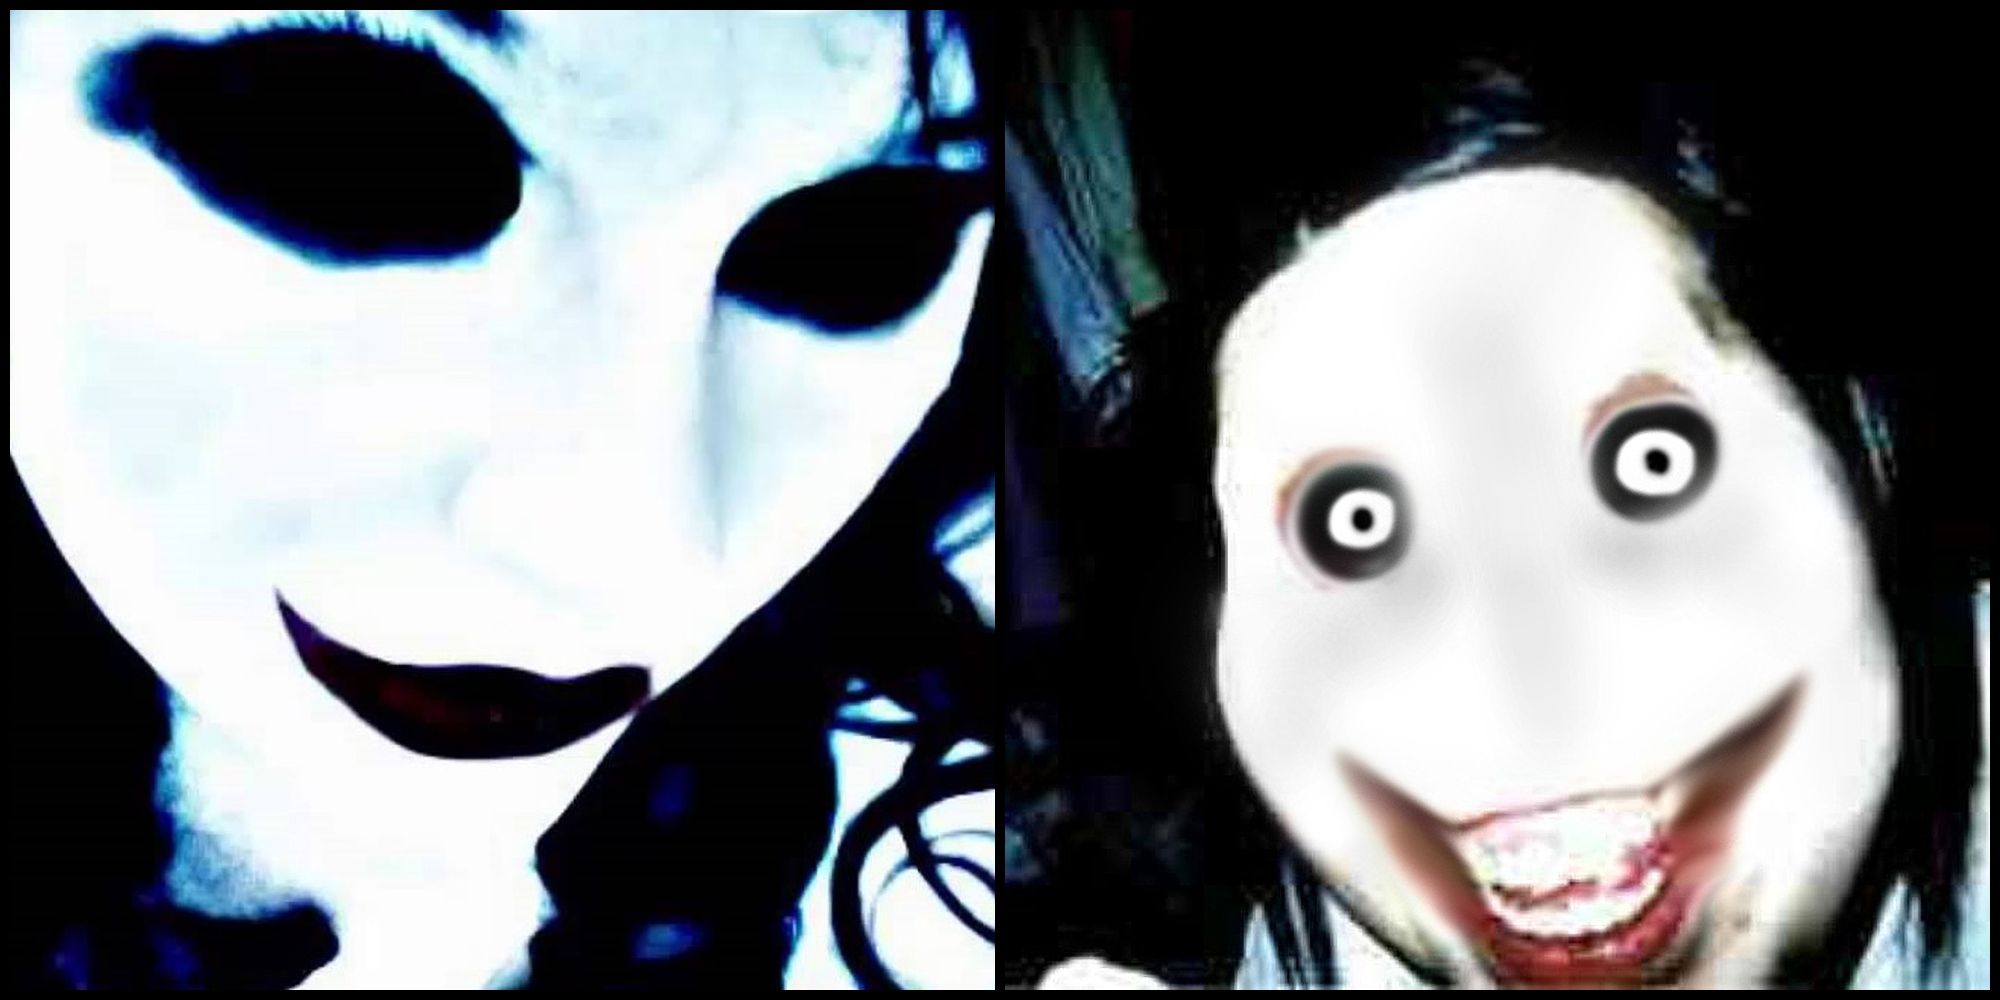 Introducing jeff the Killer, Creepypasta and scary stories